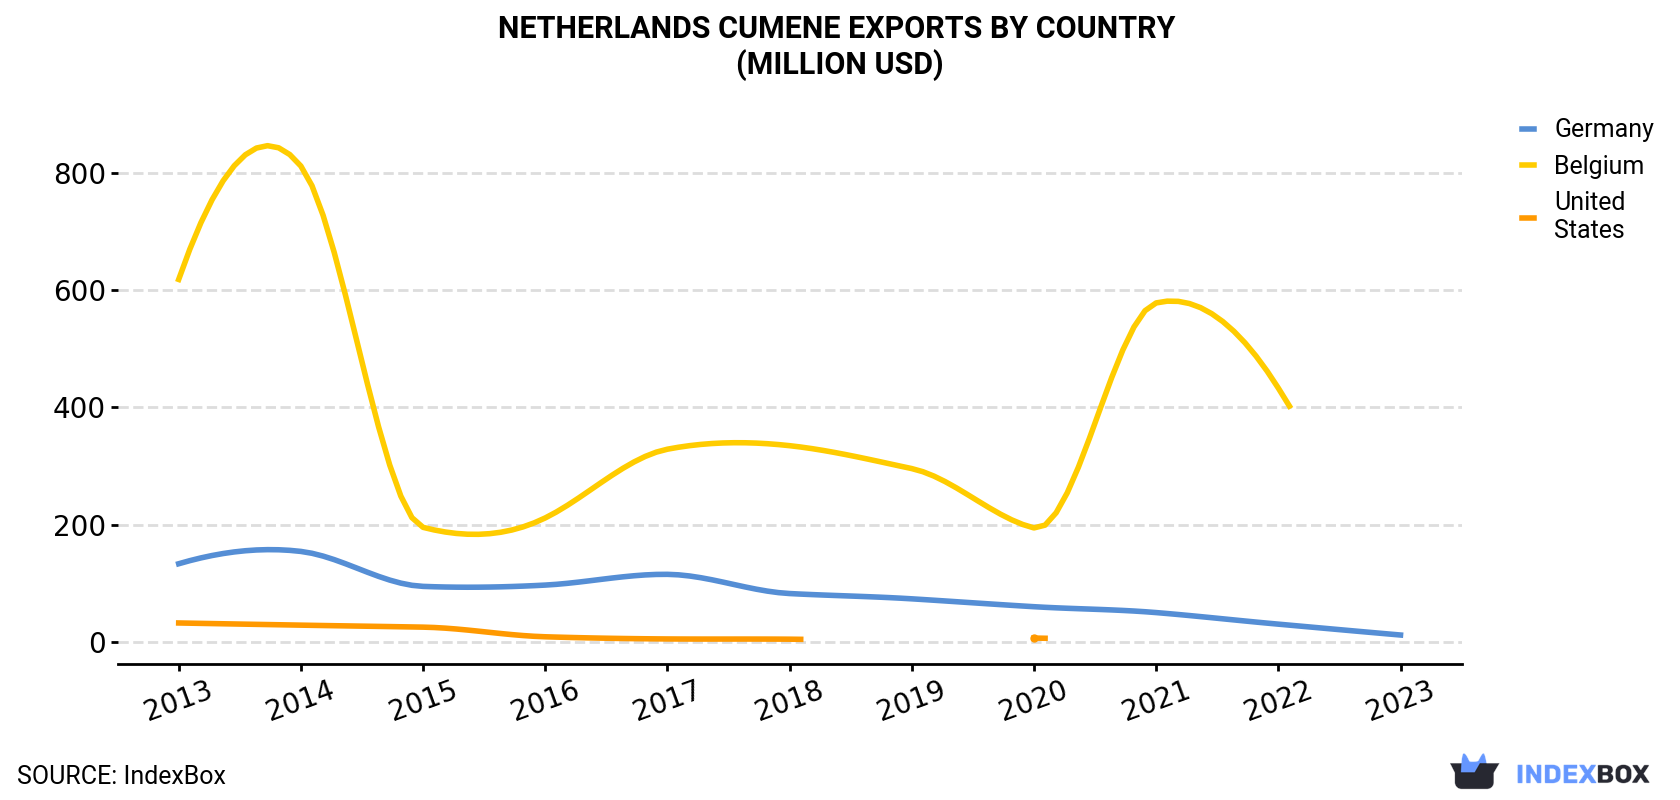 Netherlands Cumene Exports By Country (Million USD)